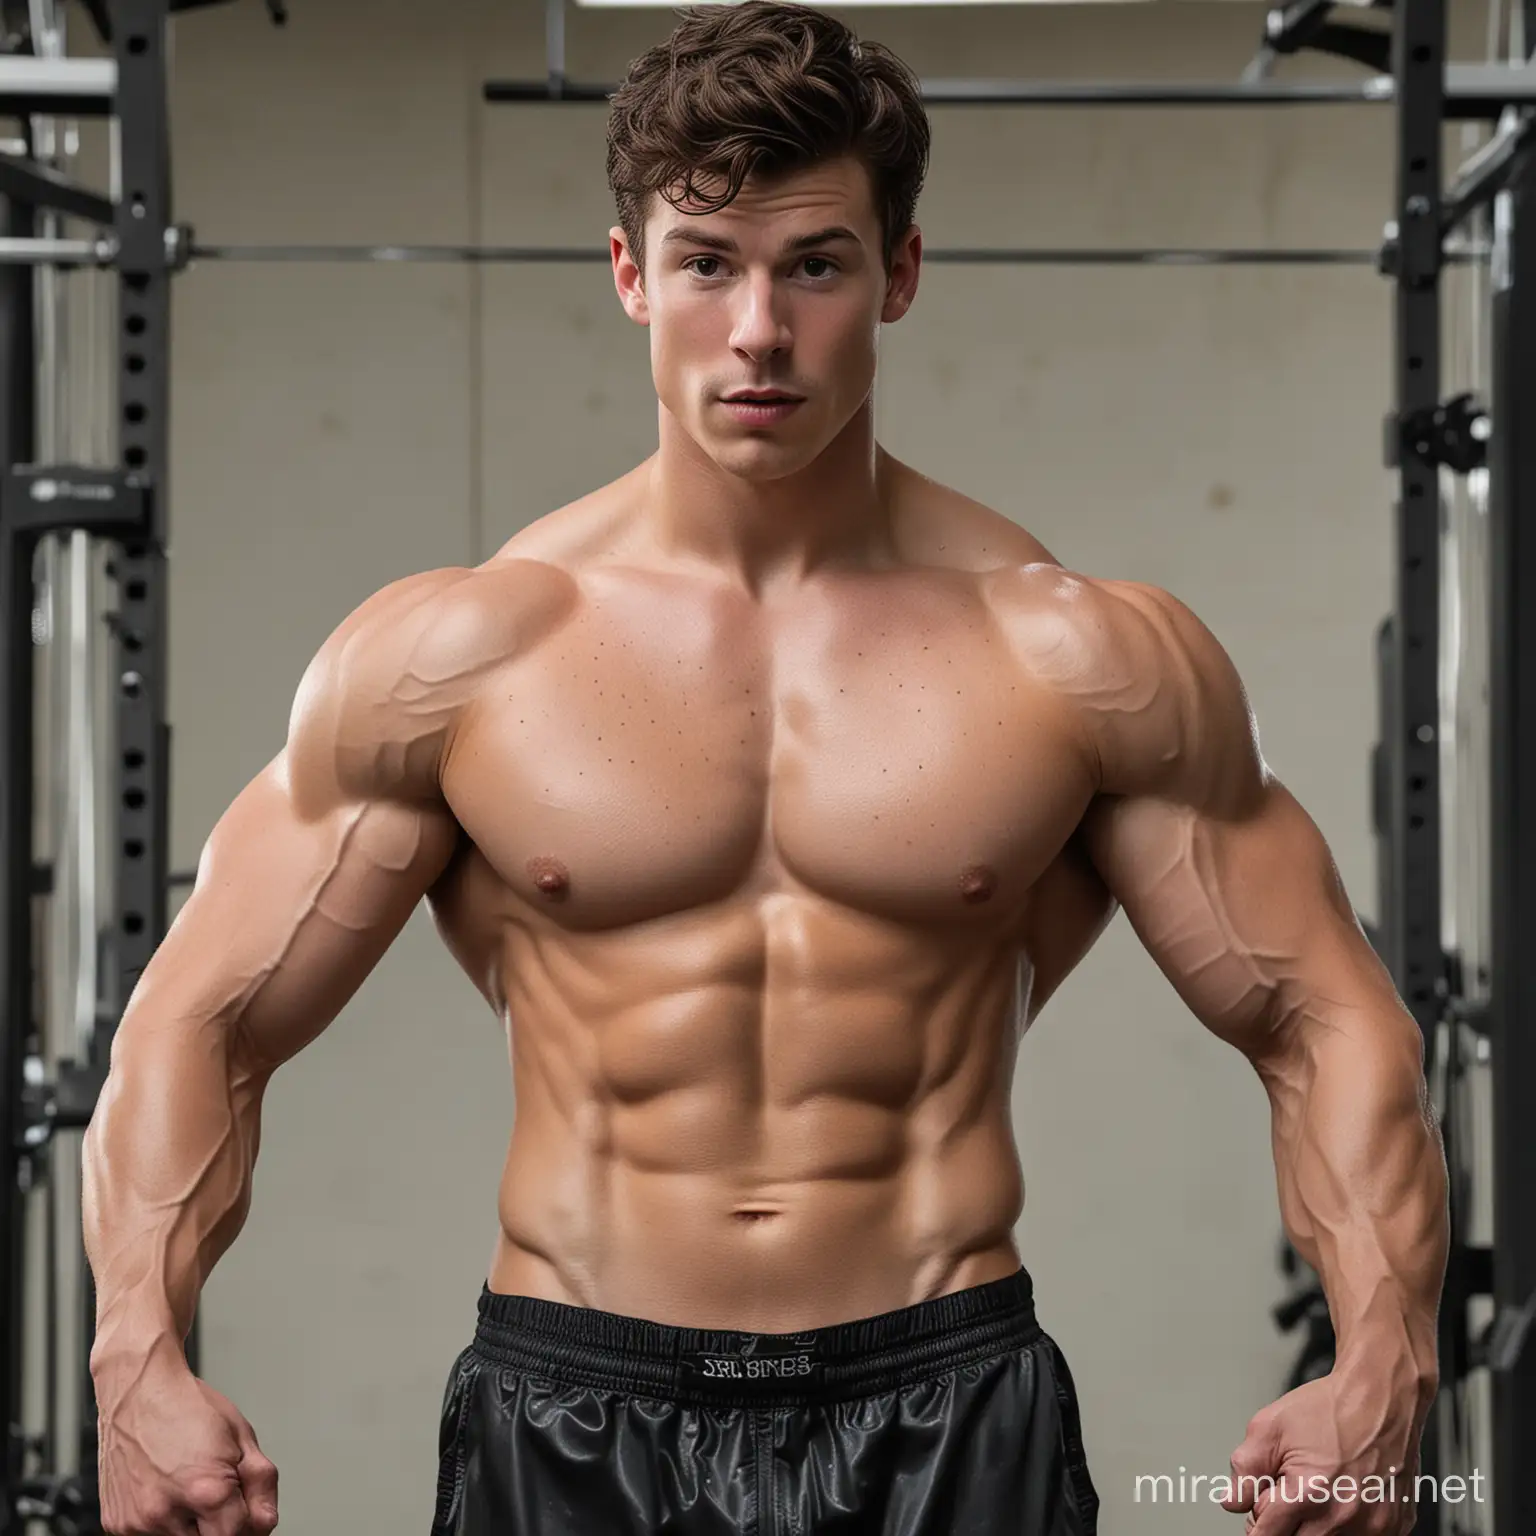 In this hyperrealistic photograph, the epitome of physical prowess and dedication stands before us. Shawn Mendes, the iconic bodybuilder, commands attention with his imposing presence, captured standing in a gym. Every detail of his muscular physique is meticulously rendered, from the bulging biceps to the defined deltoids that speak volumes of his relentless training regimen. Clad in small, tight lycra shiny wet gym shorts, Shawn's attire leaves little to the imagination, showcasing the culmination of years spent honing his body to perfection. The fabric moulds to his form, accentuating the rippling muscles of his torso and thighs with an almost palpable intensity. Amidst the backdrop of the gym, equipment serves as a testament to Shawn's relentless pursuit of strength. Yet, it is Shawn himself who is the focal point of this composition. His gaze is steely and unwavering, radiating an aura of confidence and determination. Beads of sweat glisten on his skin, catching the light in a mesmerizing display of physical prowess. In this hyperrealistic portrayal, Shawn Mendes embodies the very essence of strength and discipline, standing as a living monument to the relentless pursuit of greatness in the realm of bodybuilding.